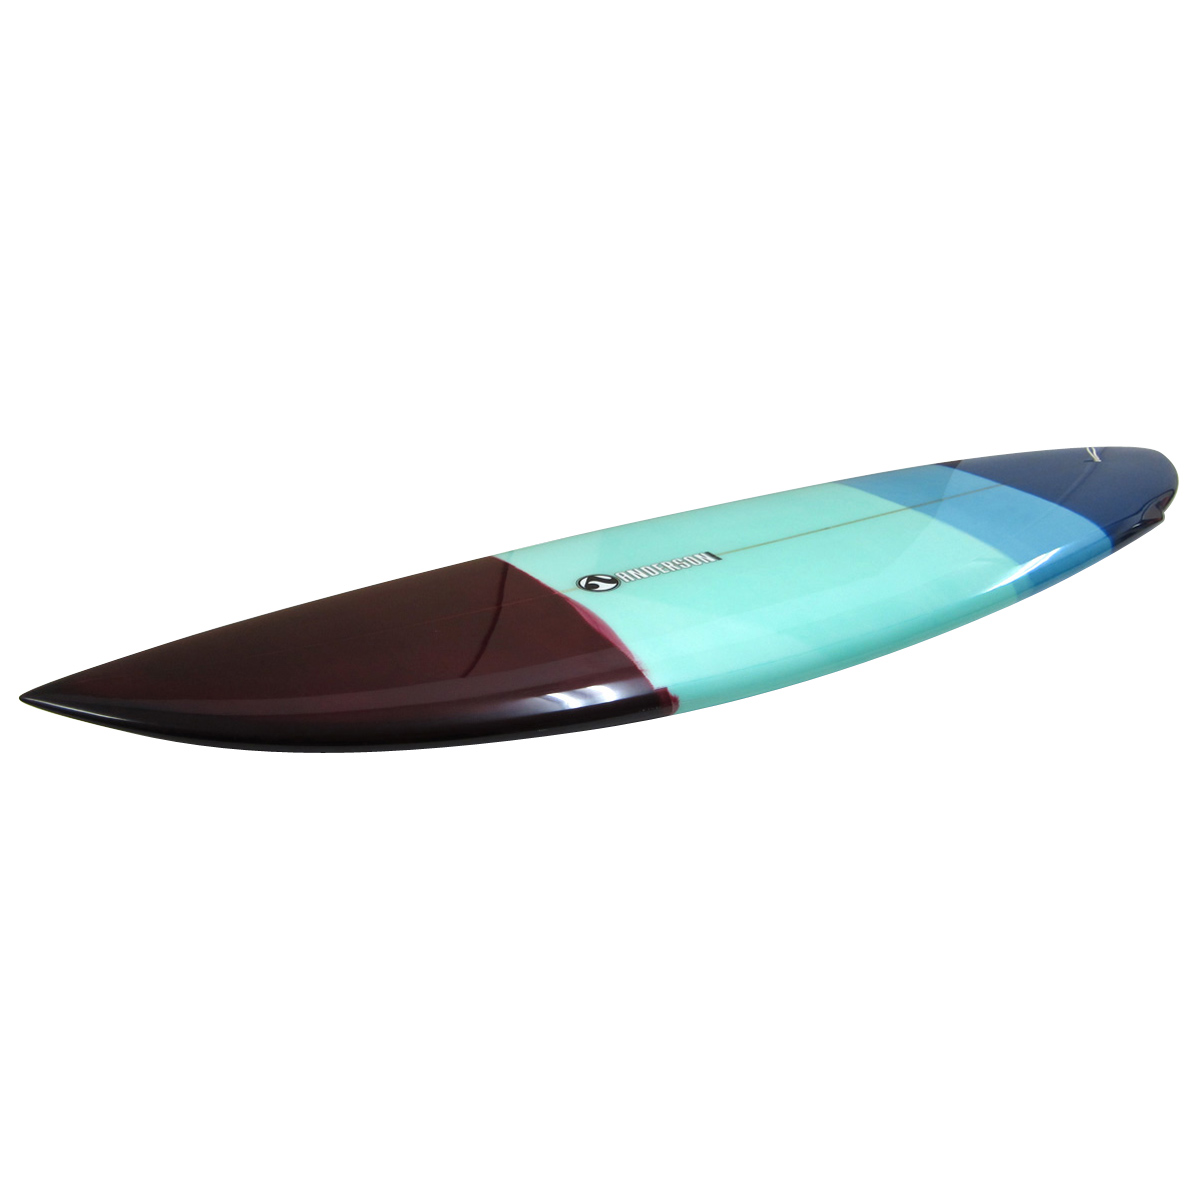 Anderson Surfboards / Custom 6`7 Wing Pin